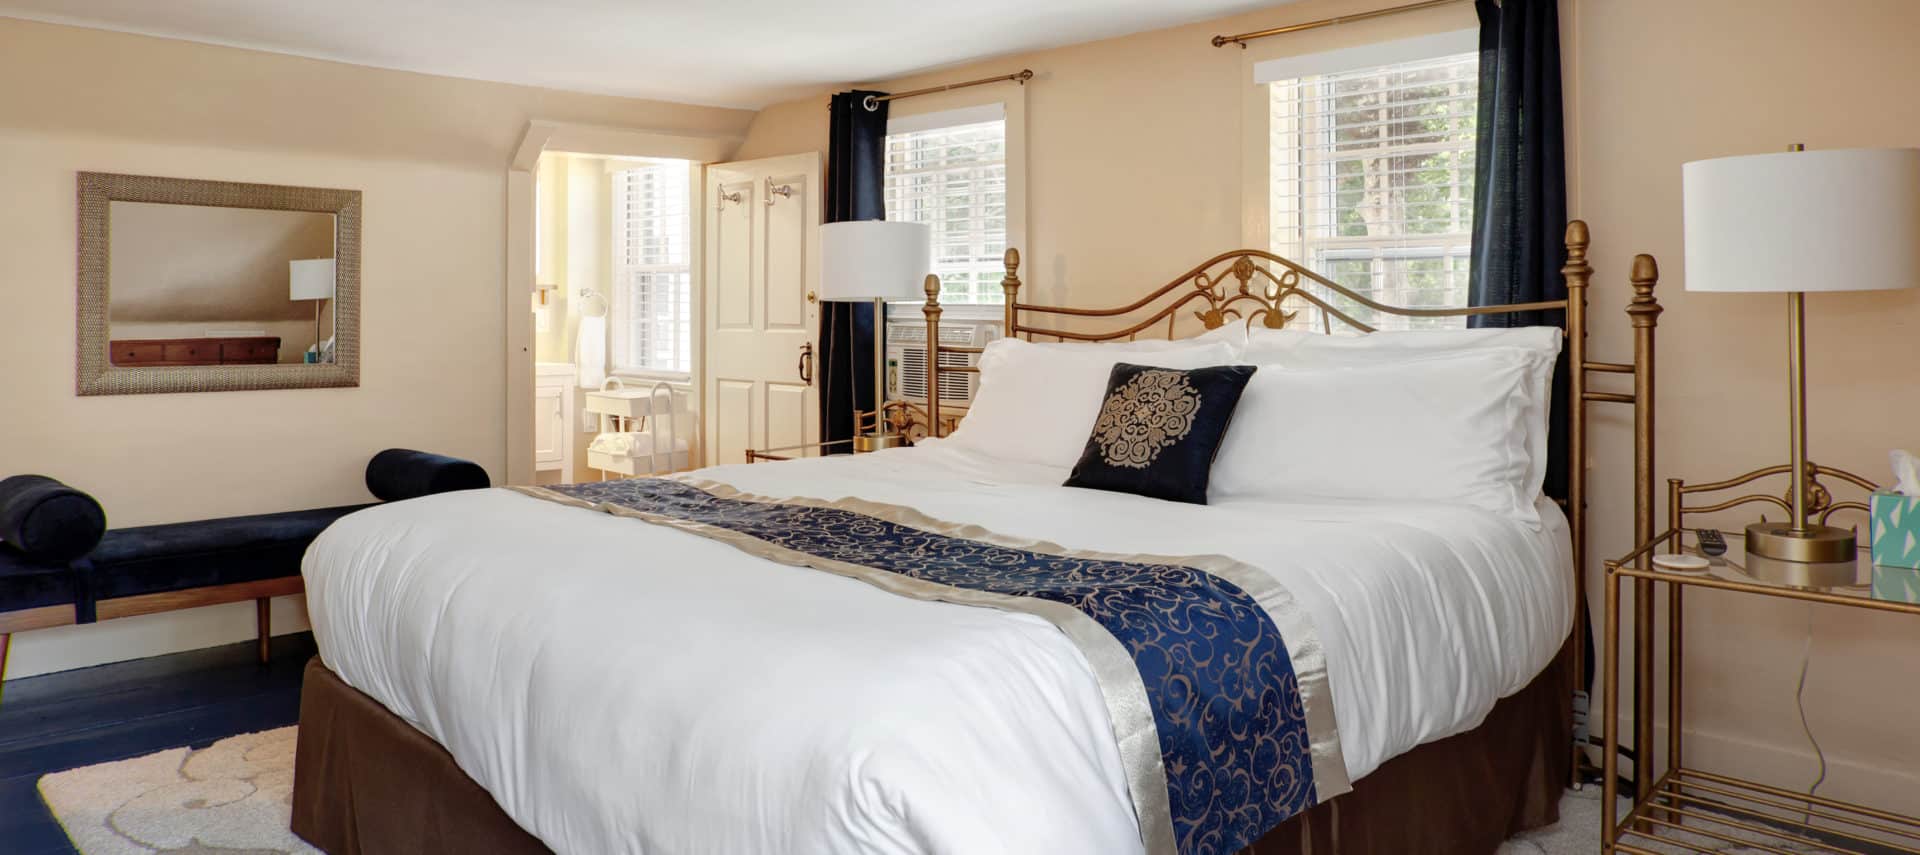 Romantic Accommodations At Our Inn For, Grand King Sleep Number Bed